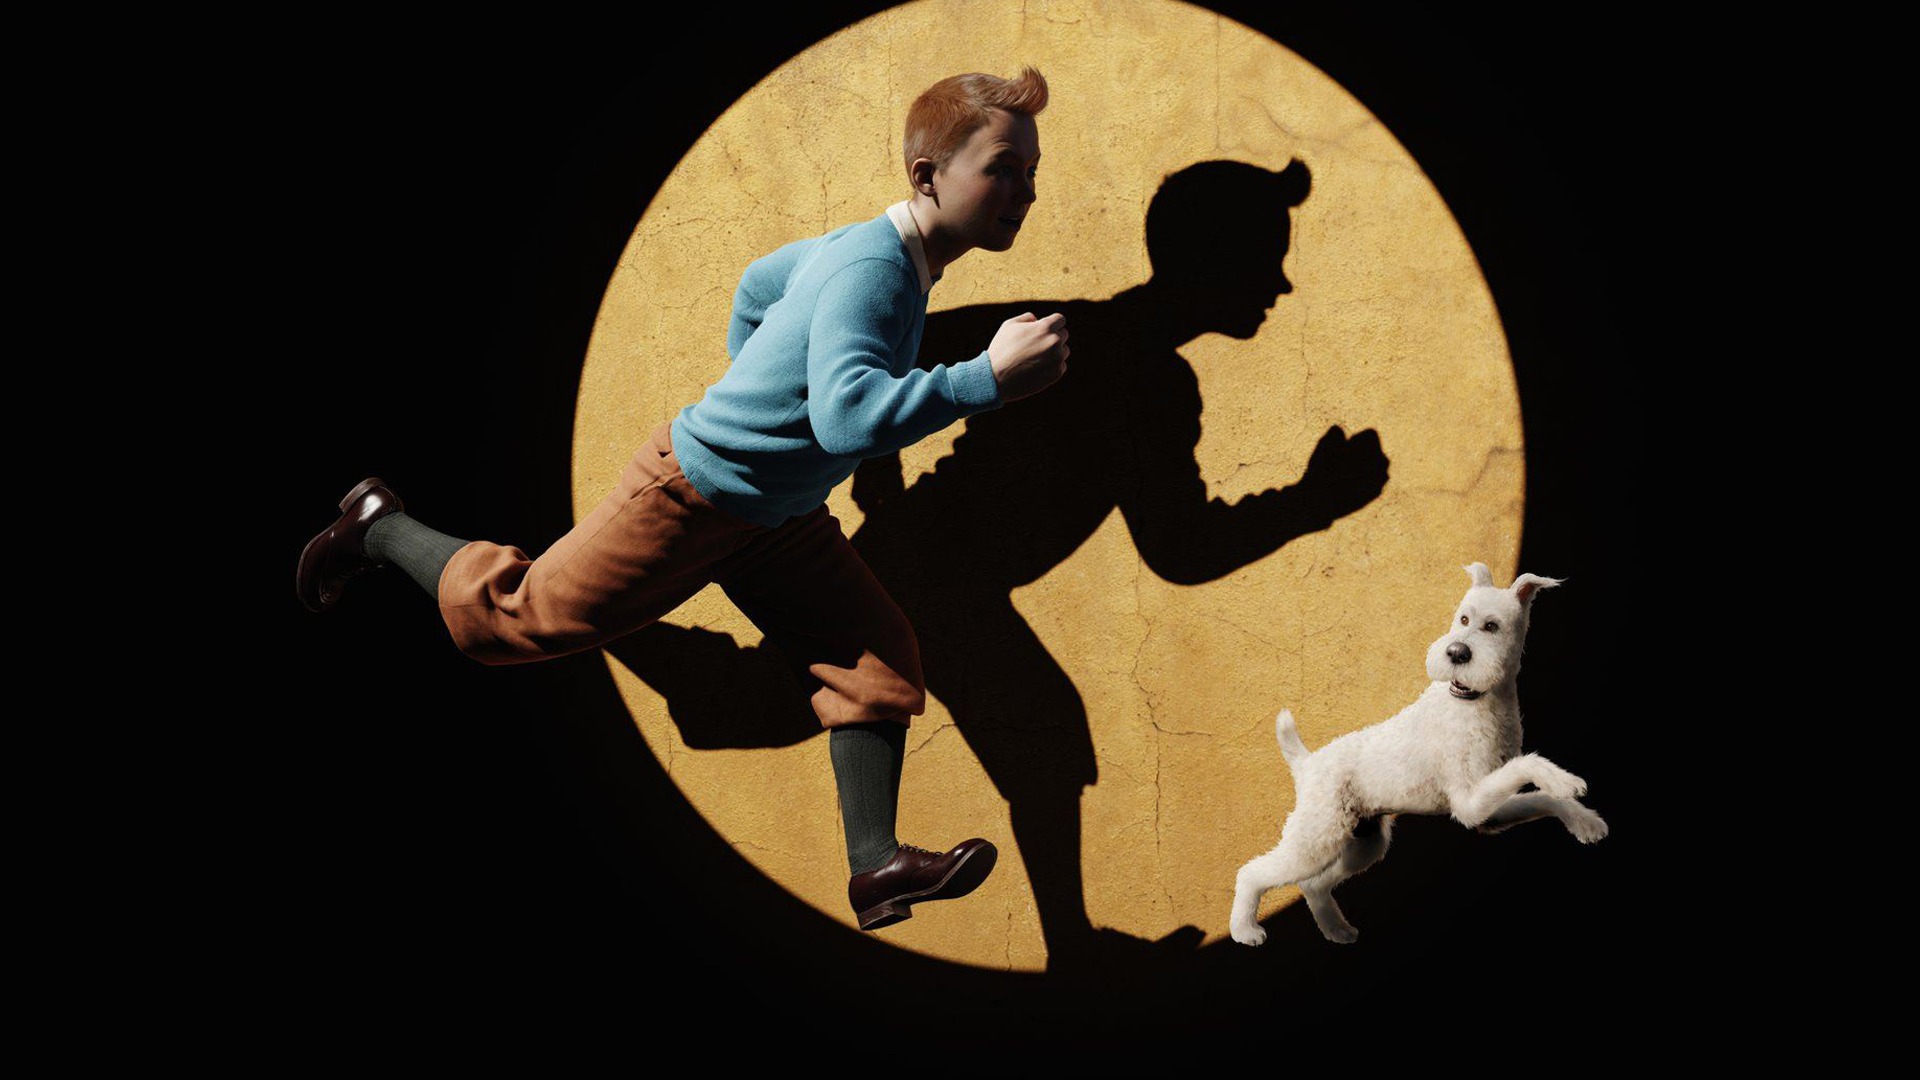 The Adventures of Tintin HD Wallpapers #15 - 1920x1080